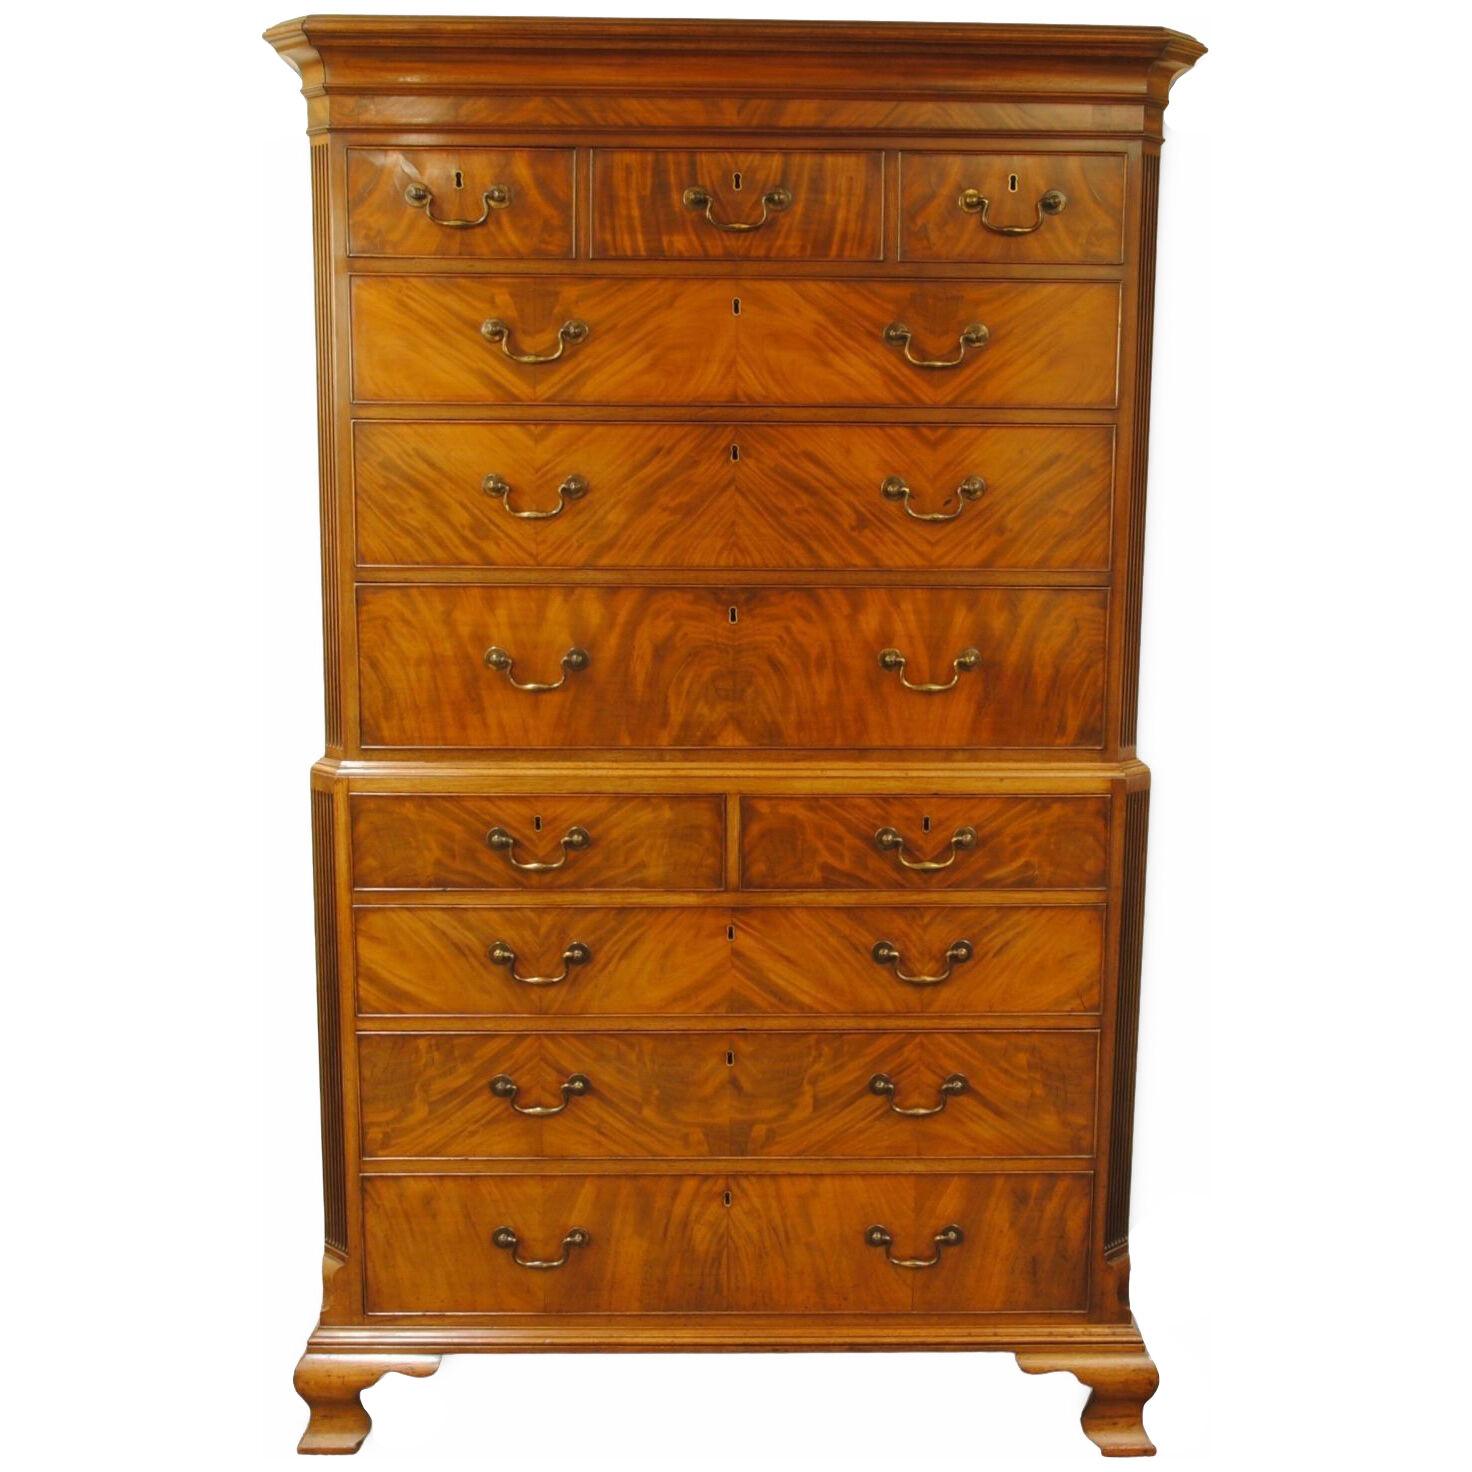 CHIPPENDALE PERIOD MAHOGANY TALLBOY